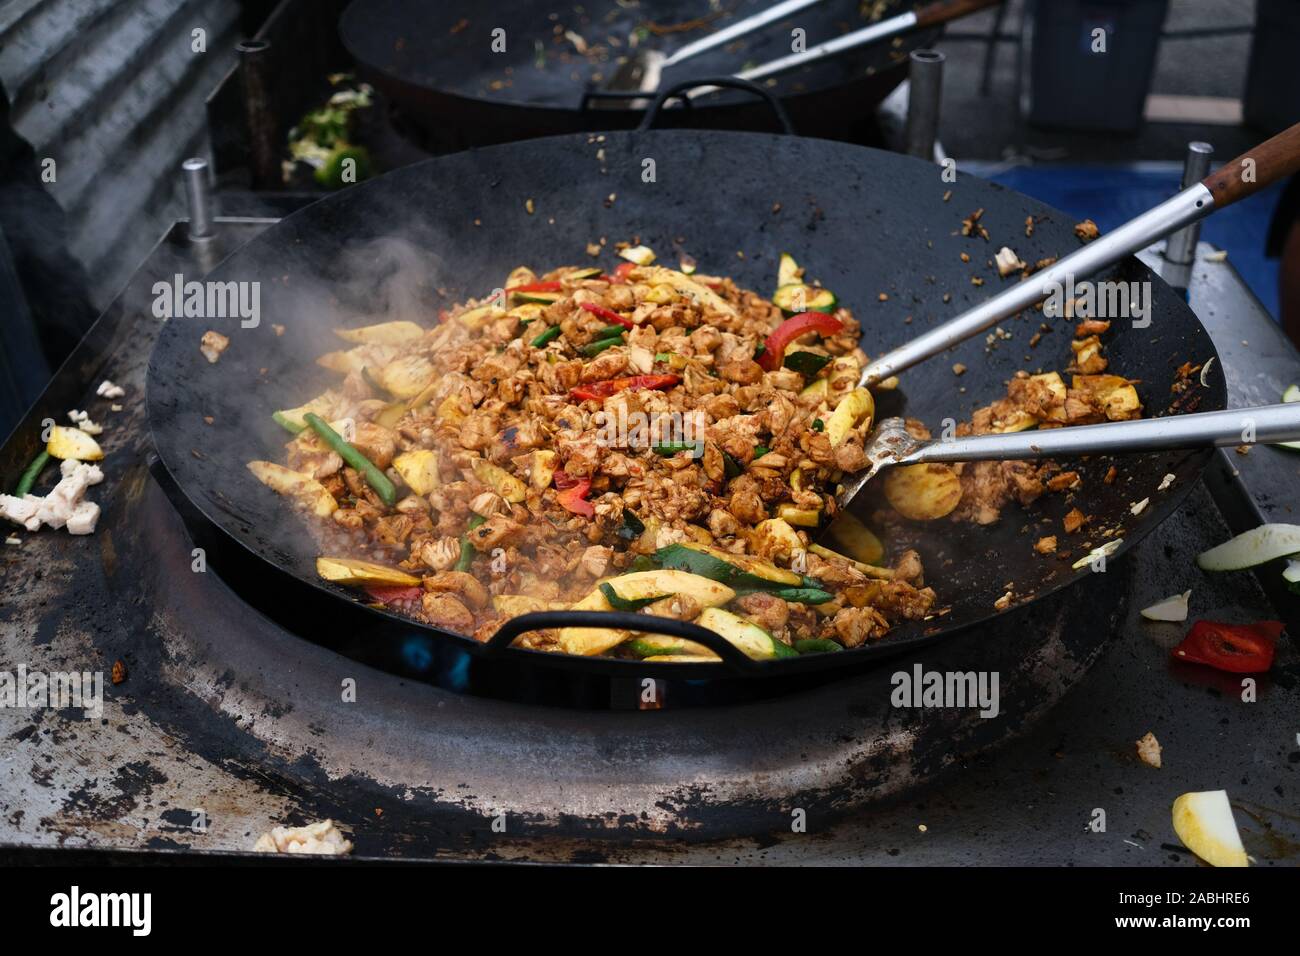 https://c8.alamy.com/comp/2ABHRE6/stir-frying-meat-and-vegetables-in-a-giant-wok-at-a-night-market-2ABHRE6.jpg